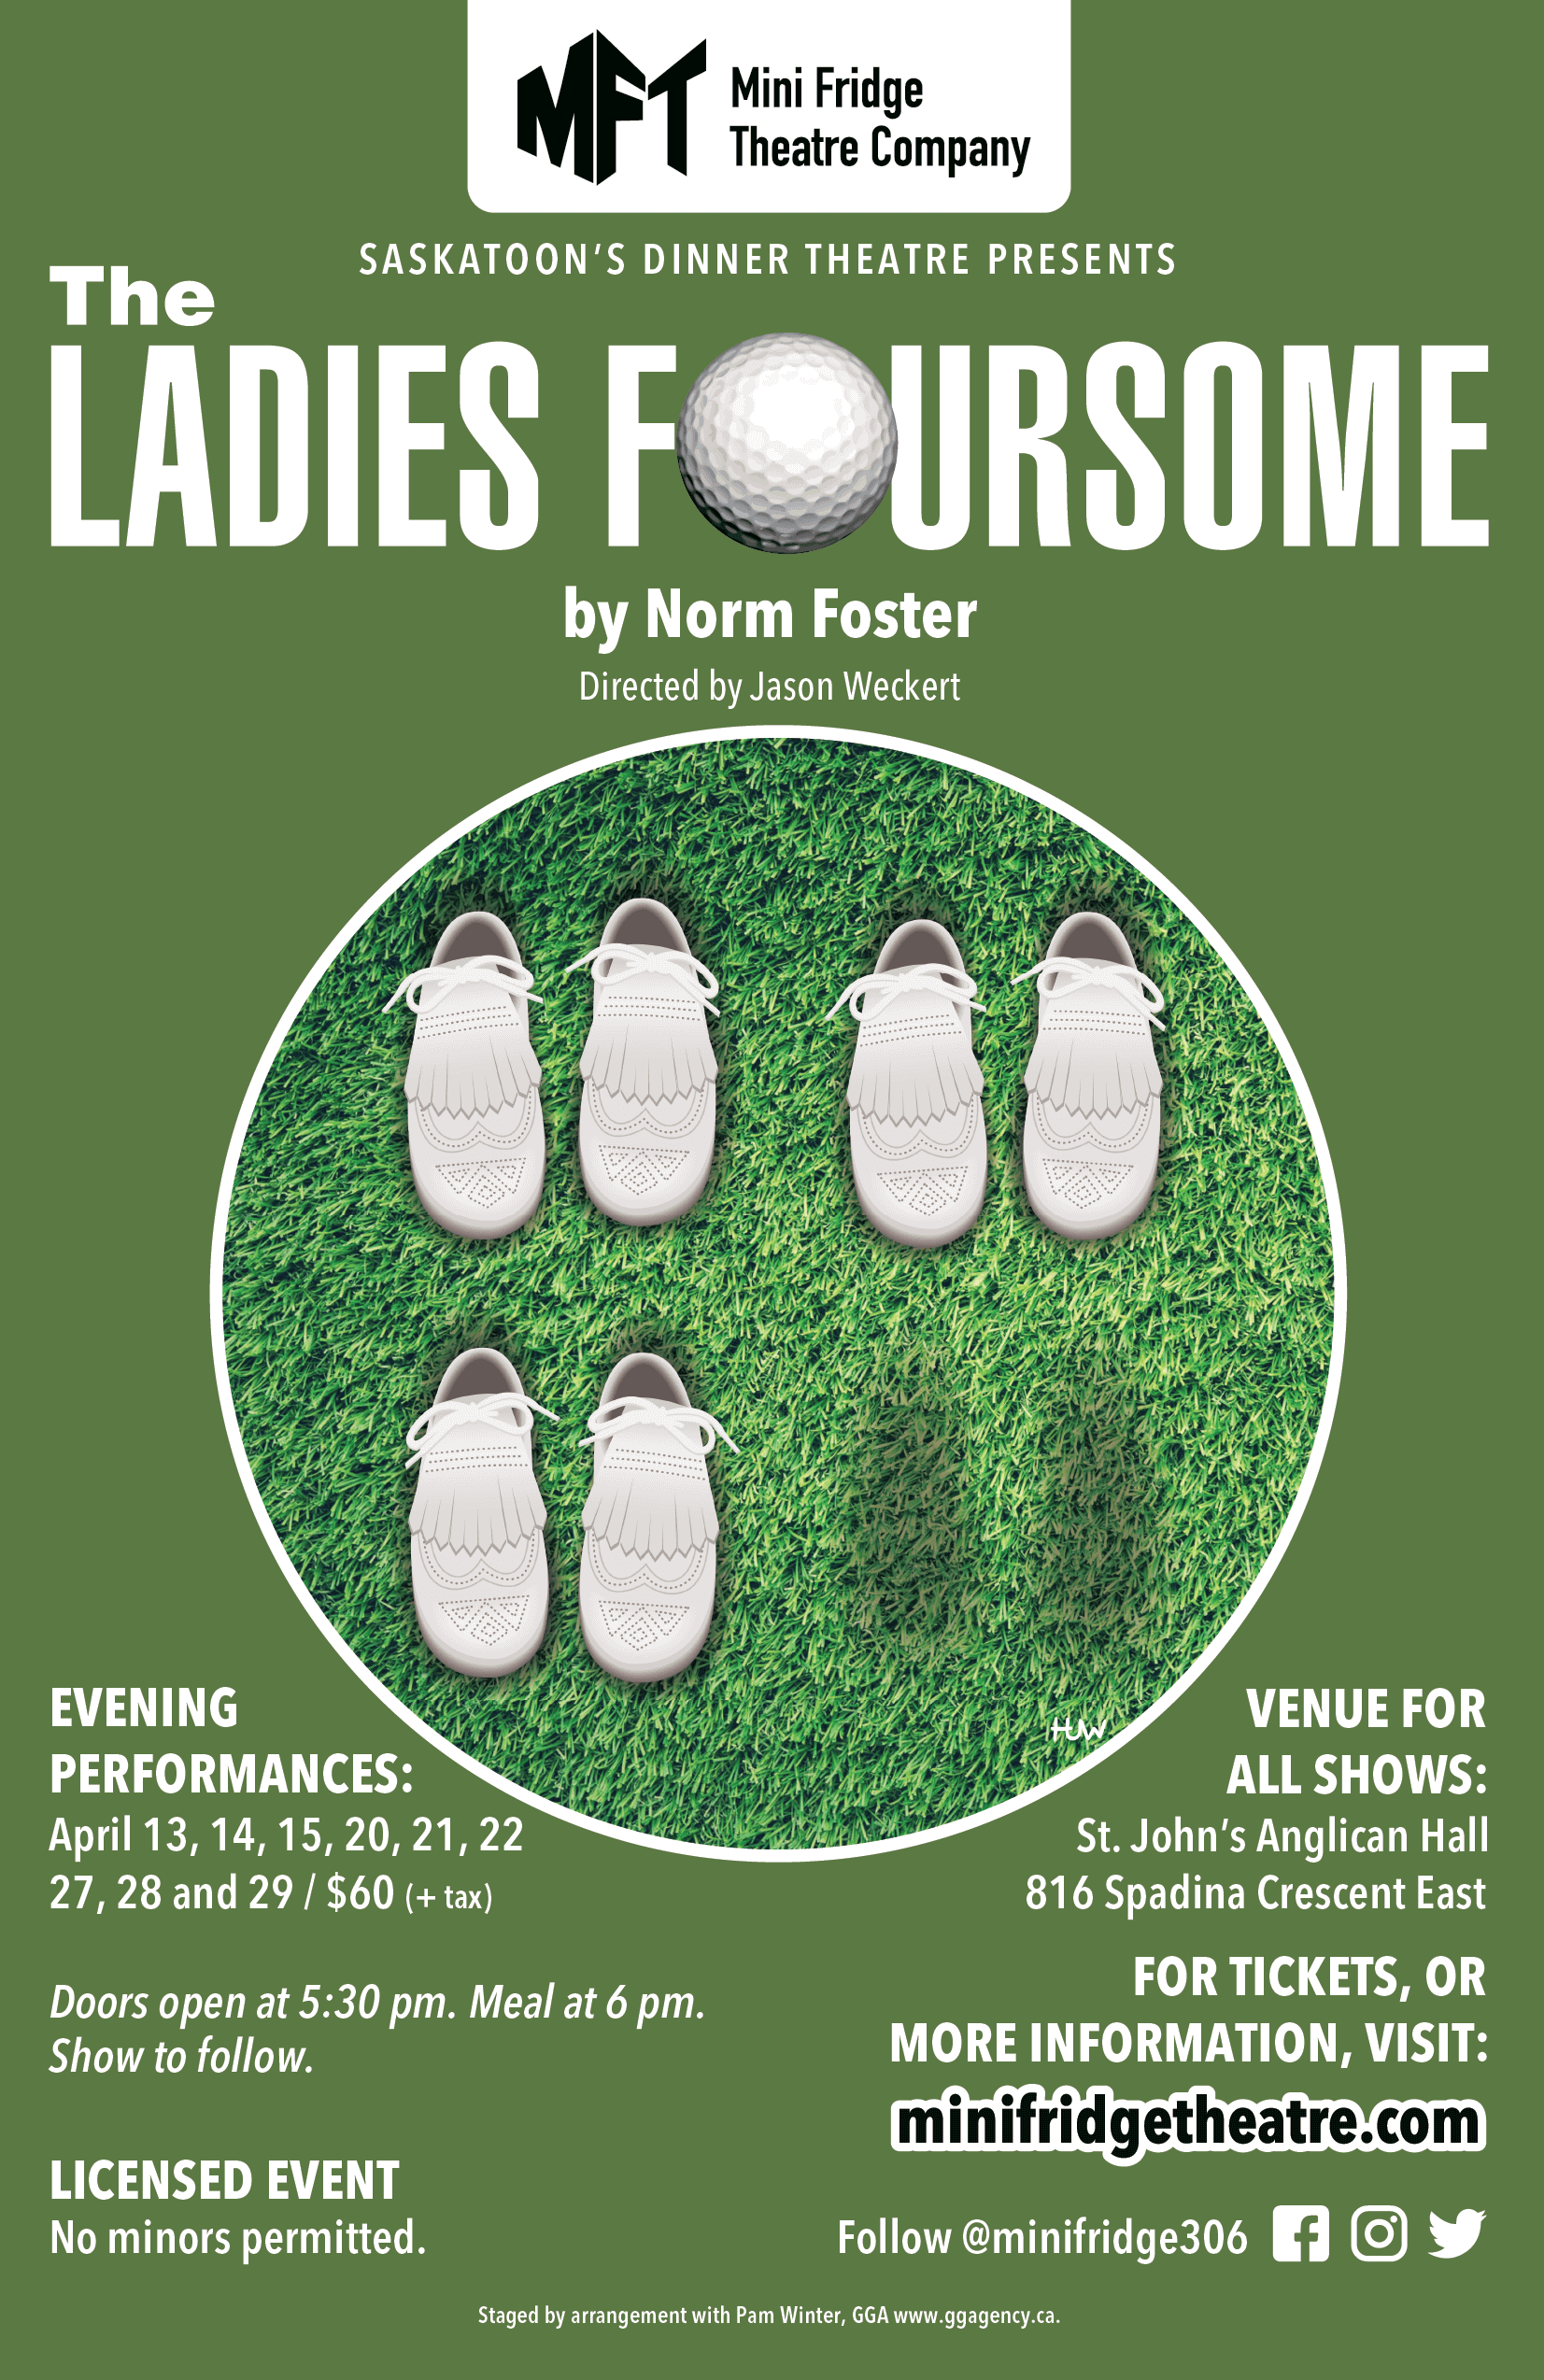 Poster for Mini Fridge Theatre Company's 2023 live dinner theatre production of Norm Foster's The Ladies Foursome in Saskatoon, Saskatchewan